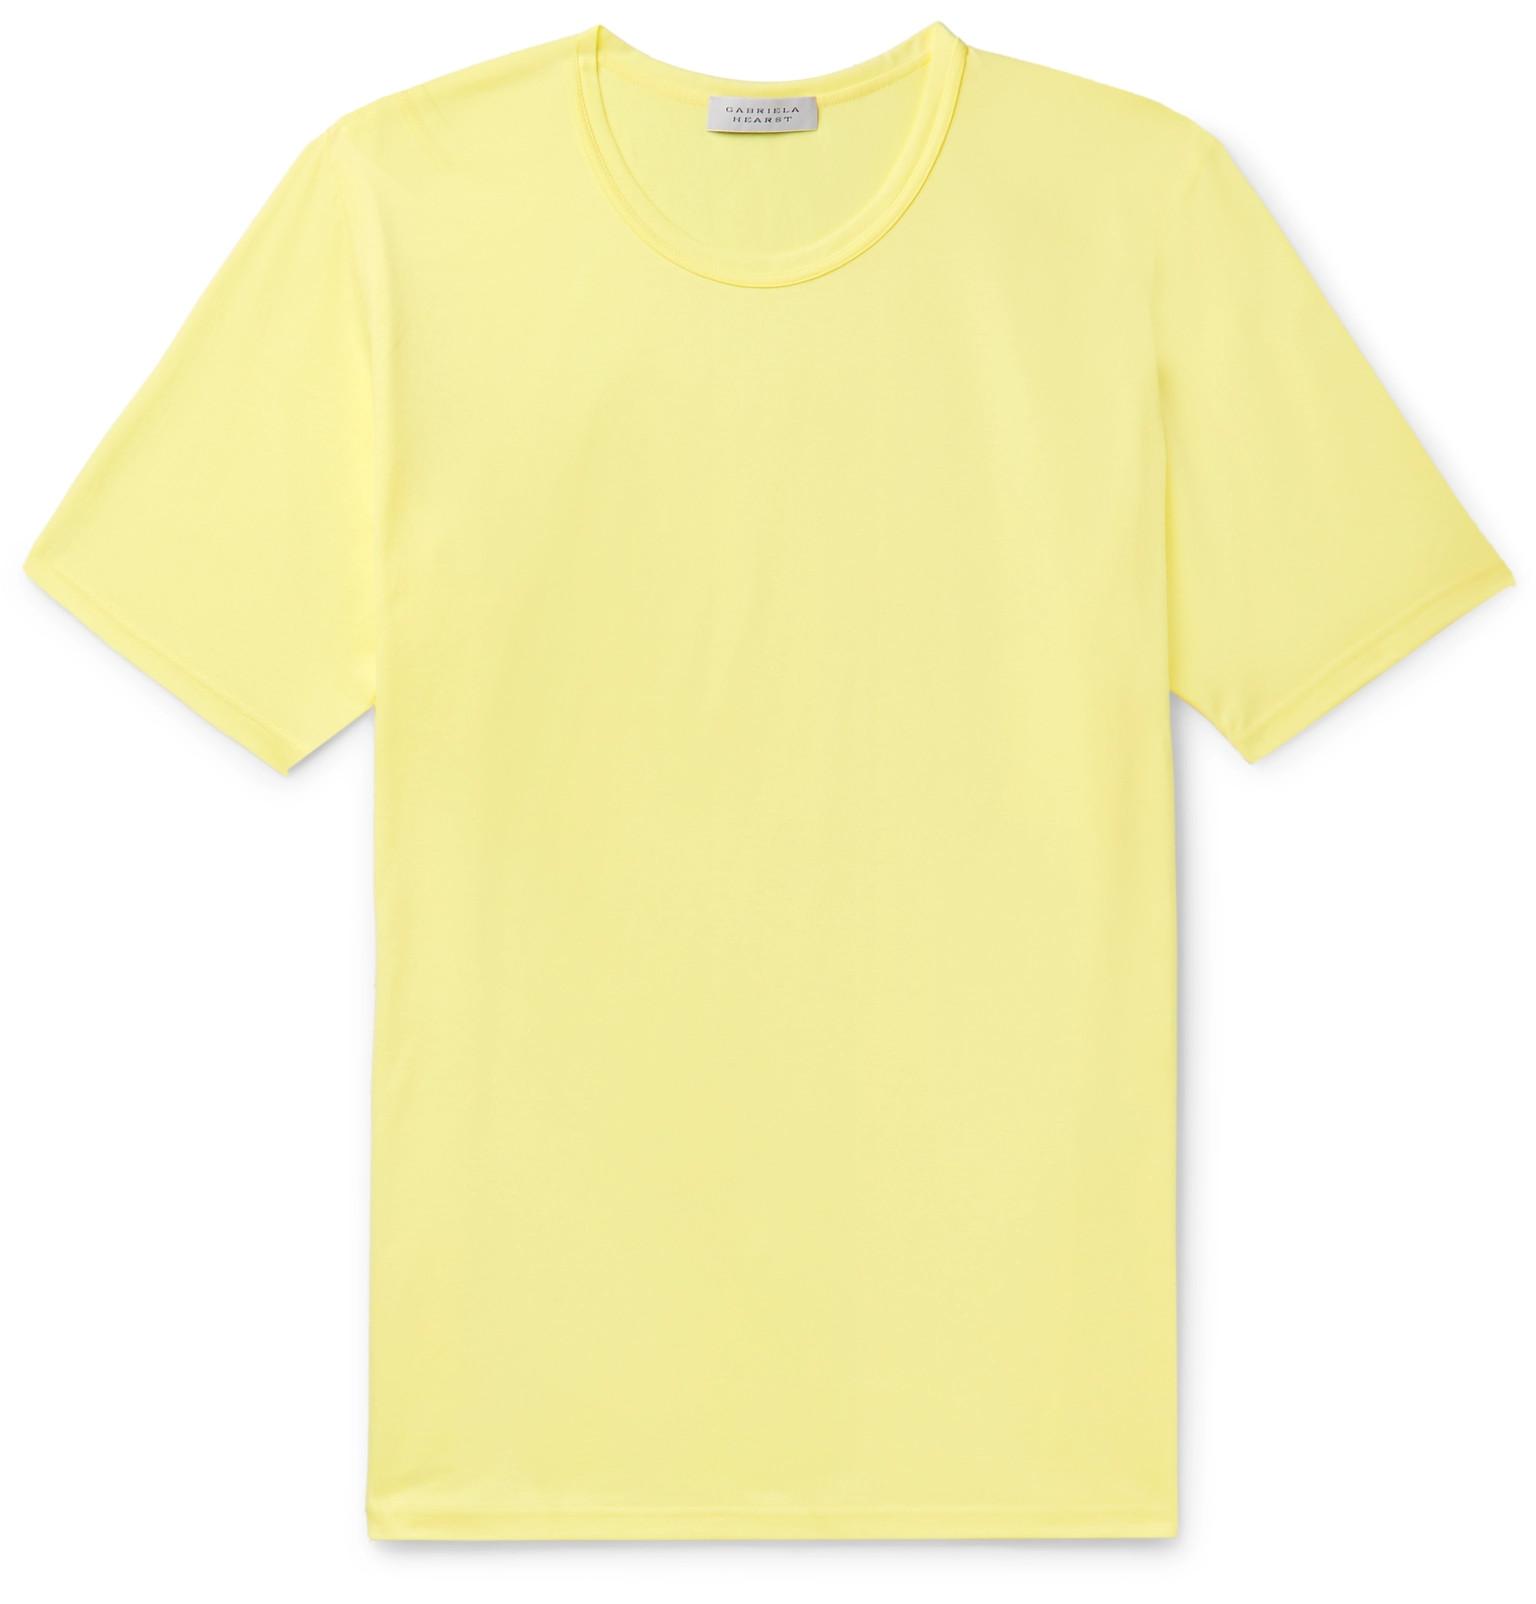 Gabriela Hearst Banderia Cotton-jersey T-shirt in Yellow for Men - Lyst